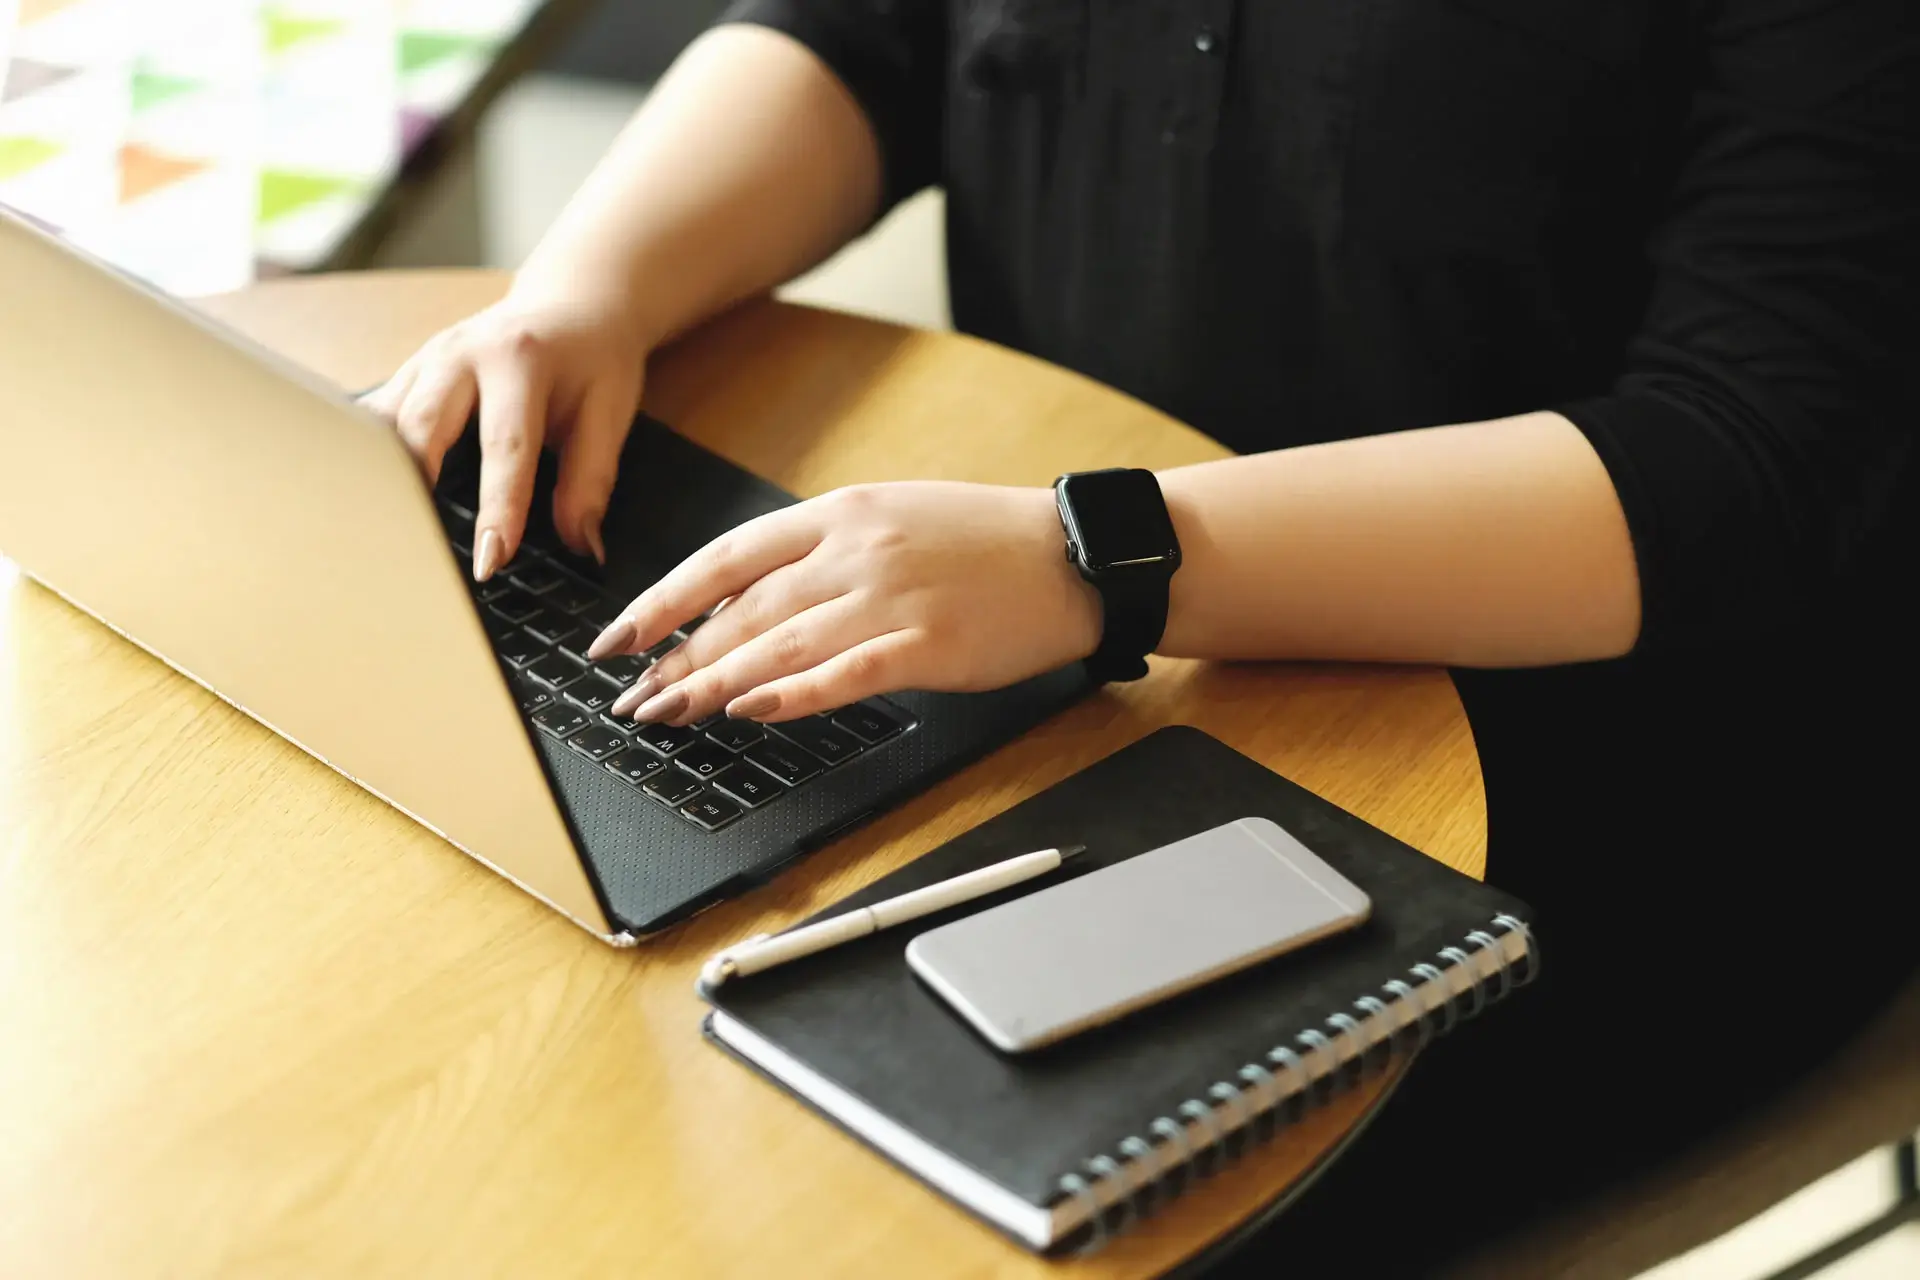 an image depicting a woman typing at a laptop